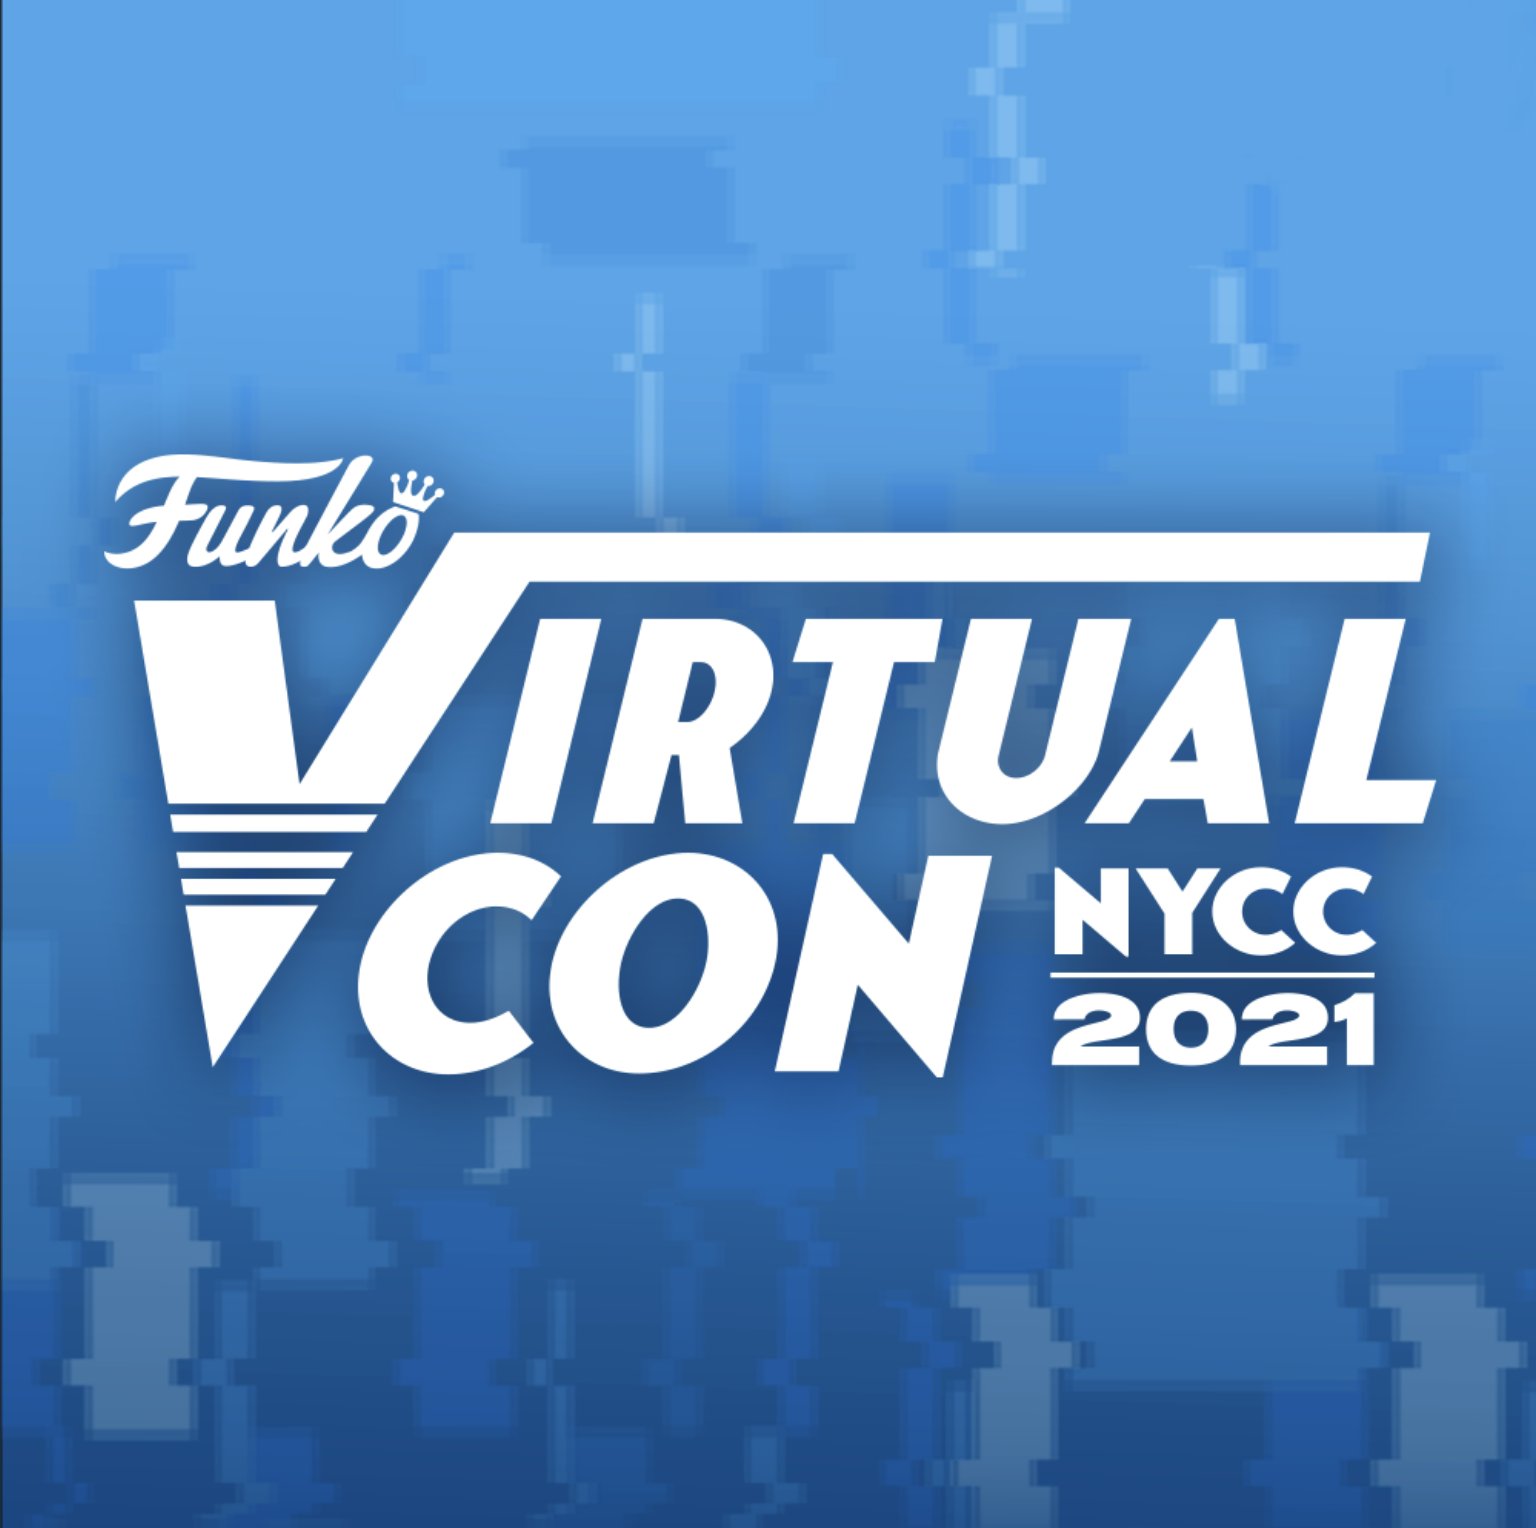 Top Start of NYCC Virtual Con 2021